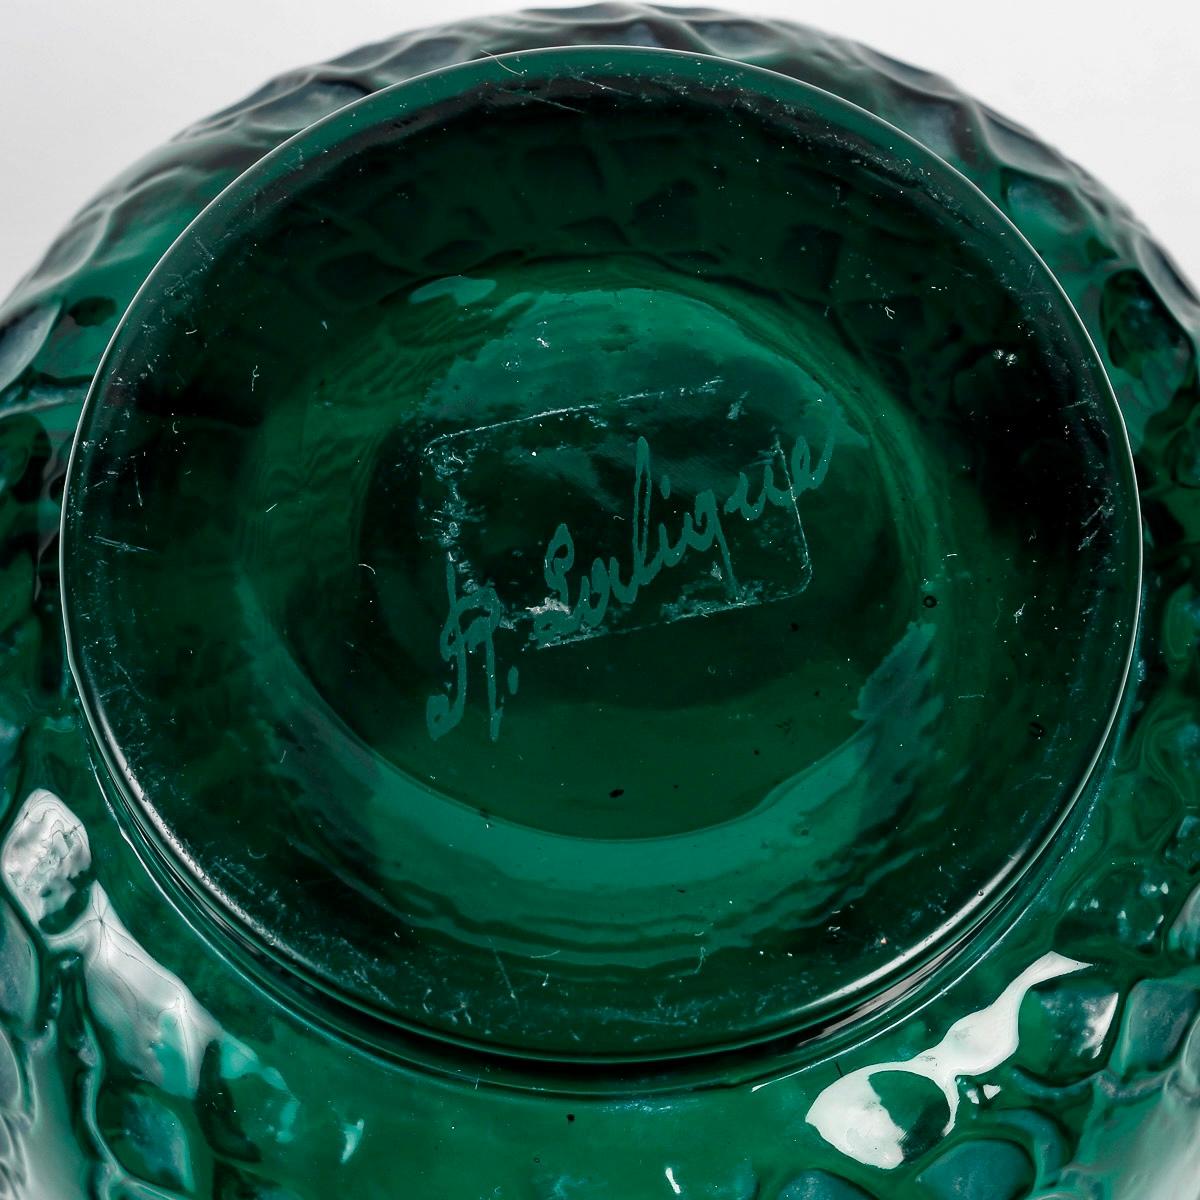 Molded 1921 Rene Lalique Vase Meduse Emerald Green Glass with White Patina For Sale